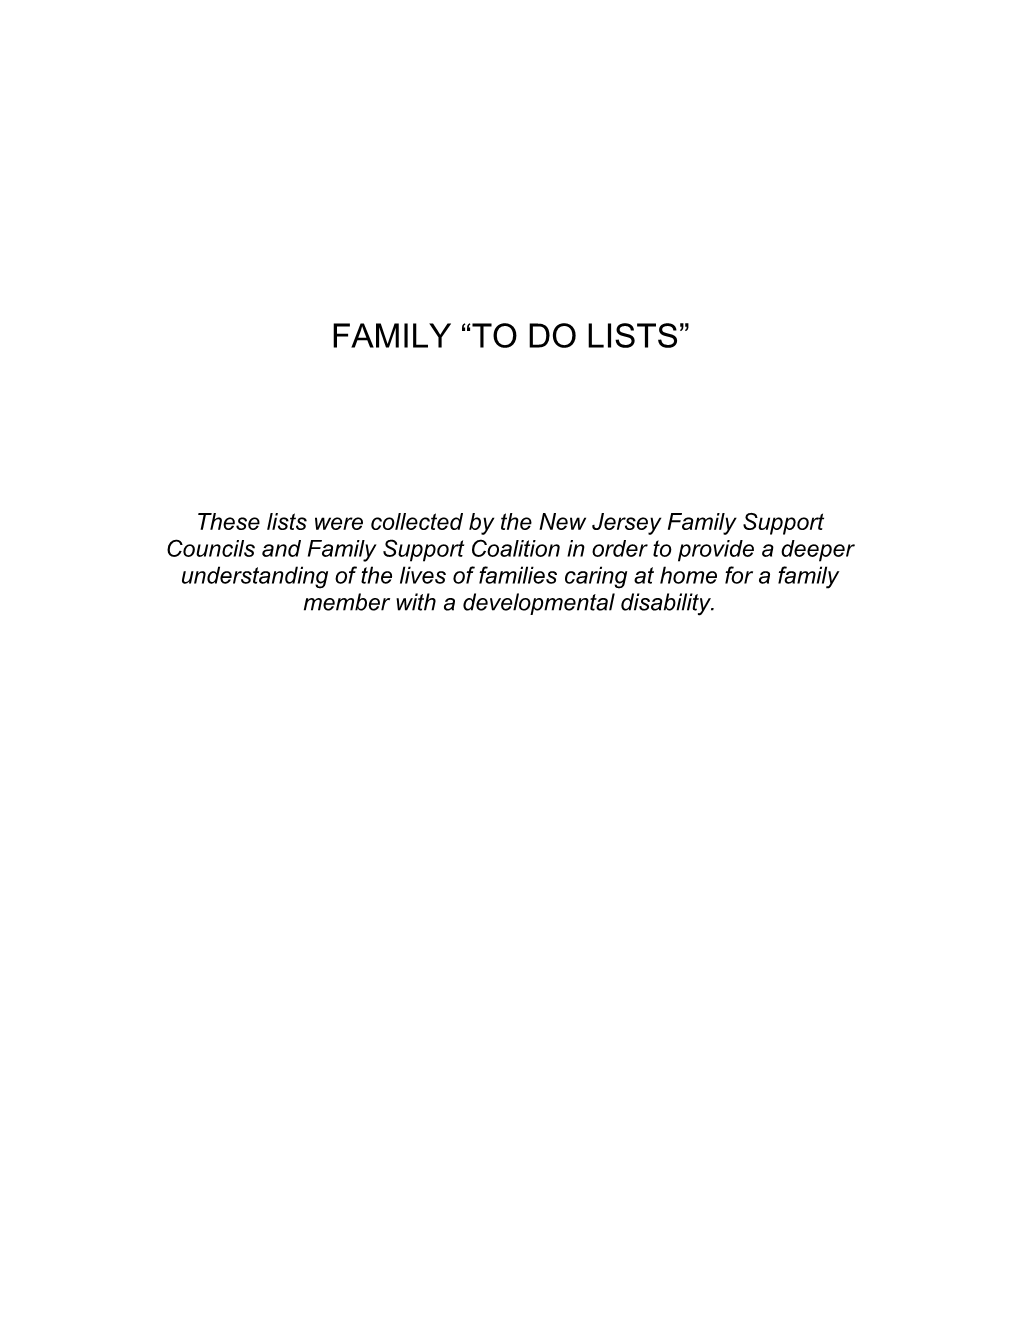 Family to Do Lists